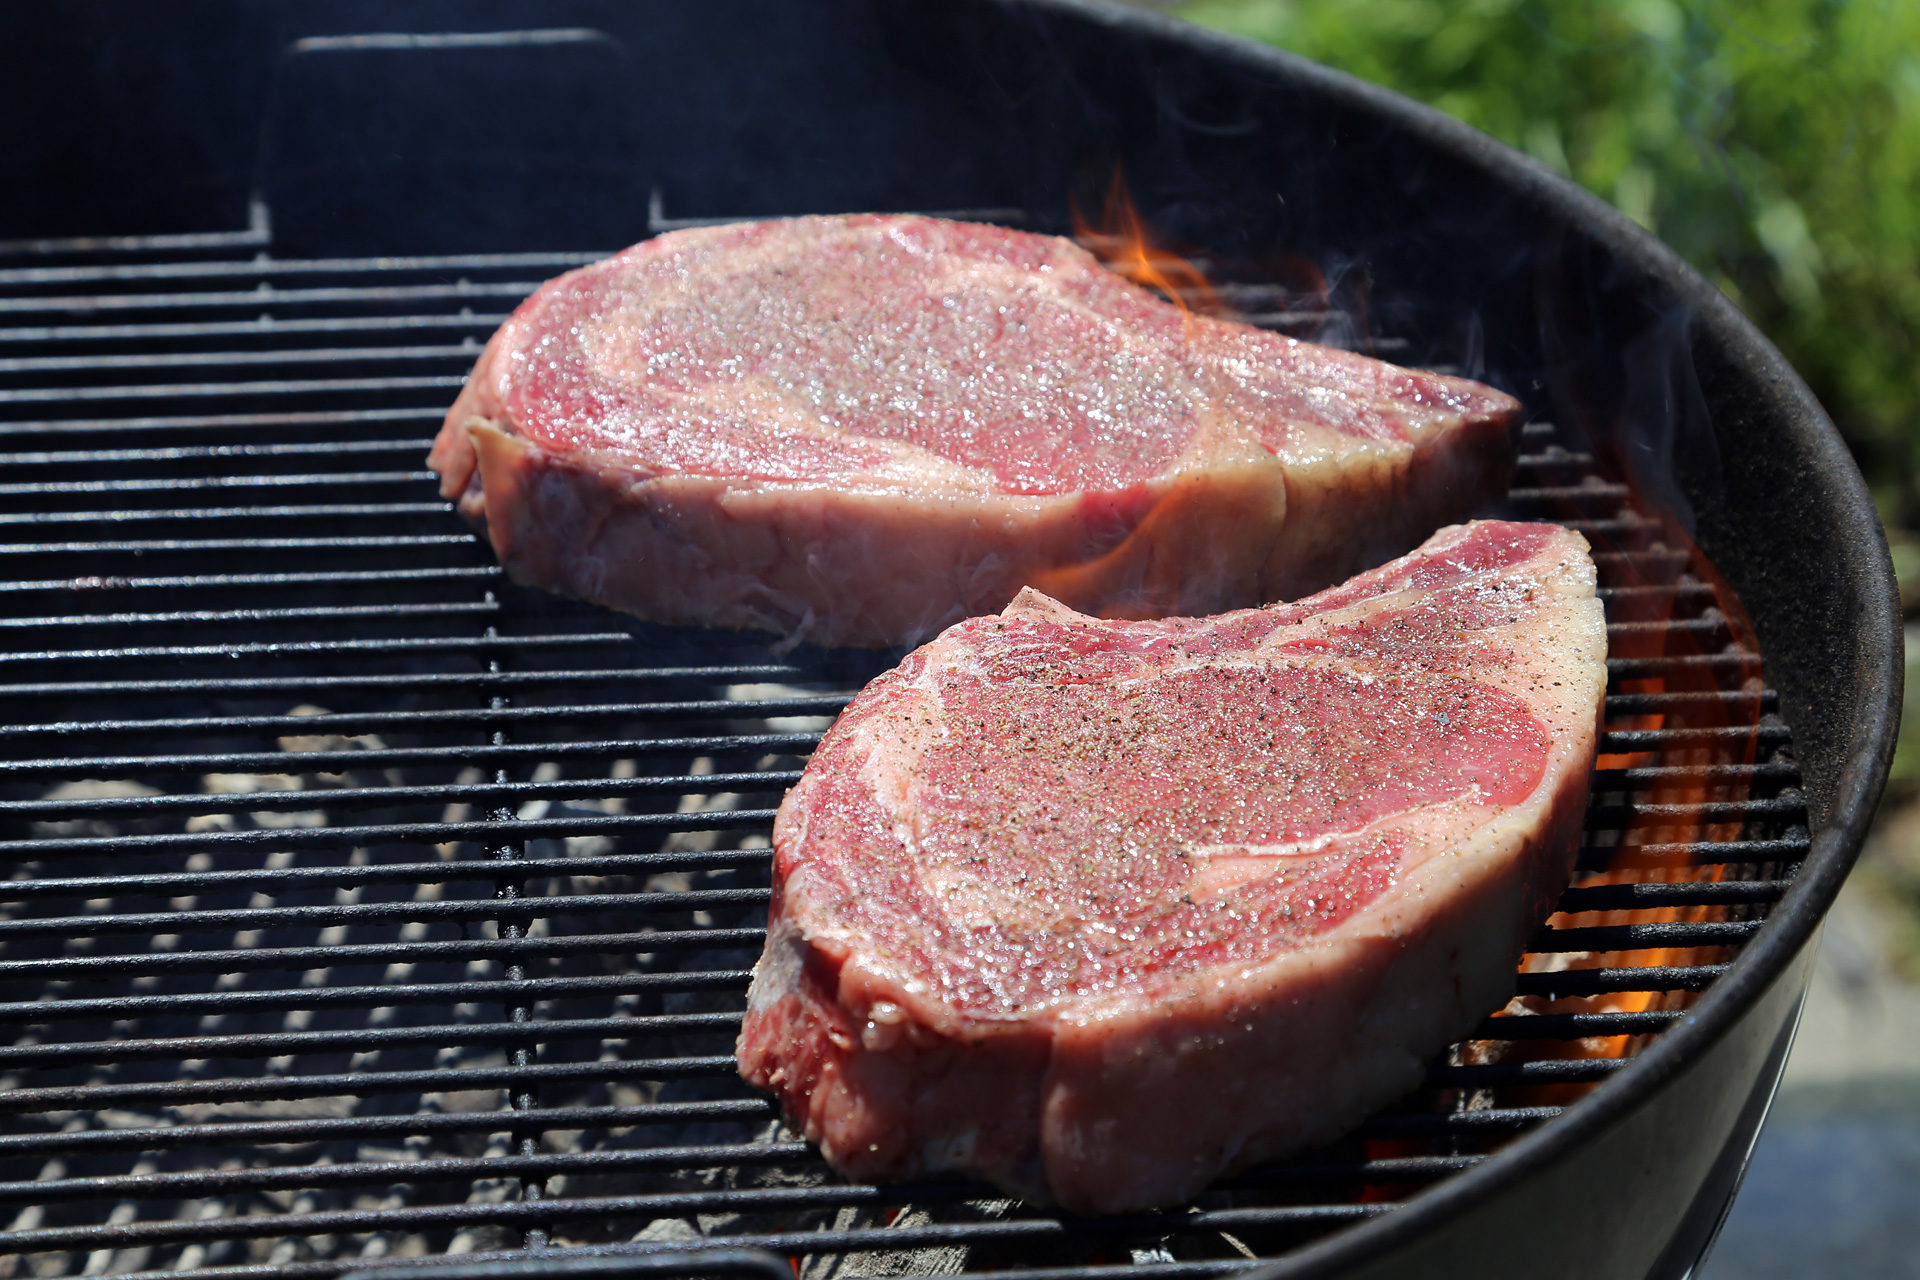 Set up a charcoal grill for high indirect heat. Brush the grill grate with oil. Place steaks on grill over hot area.